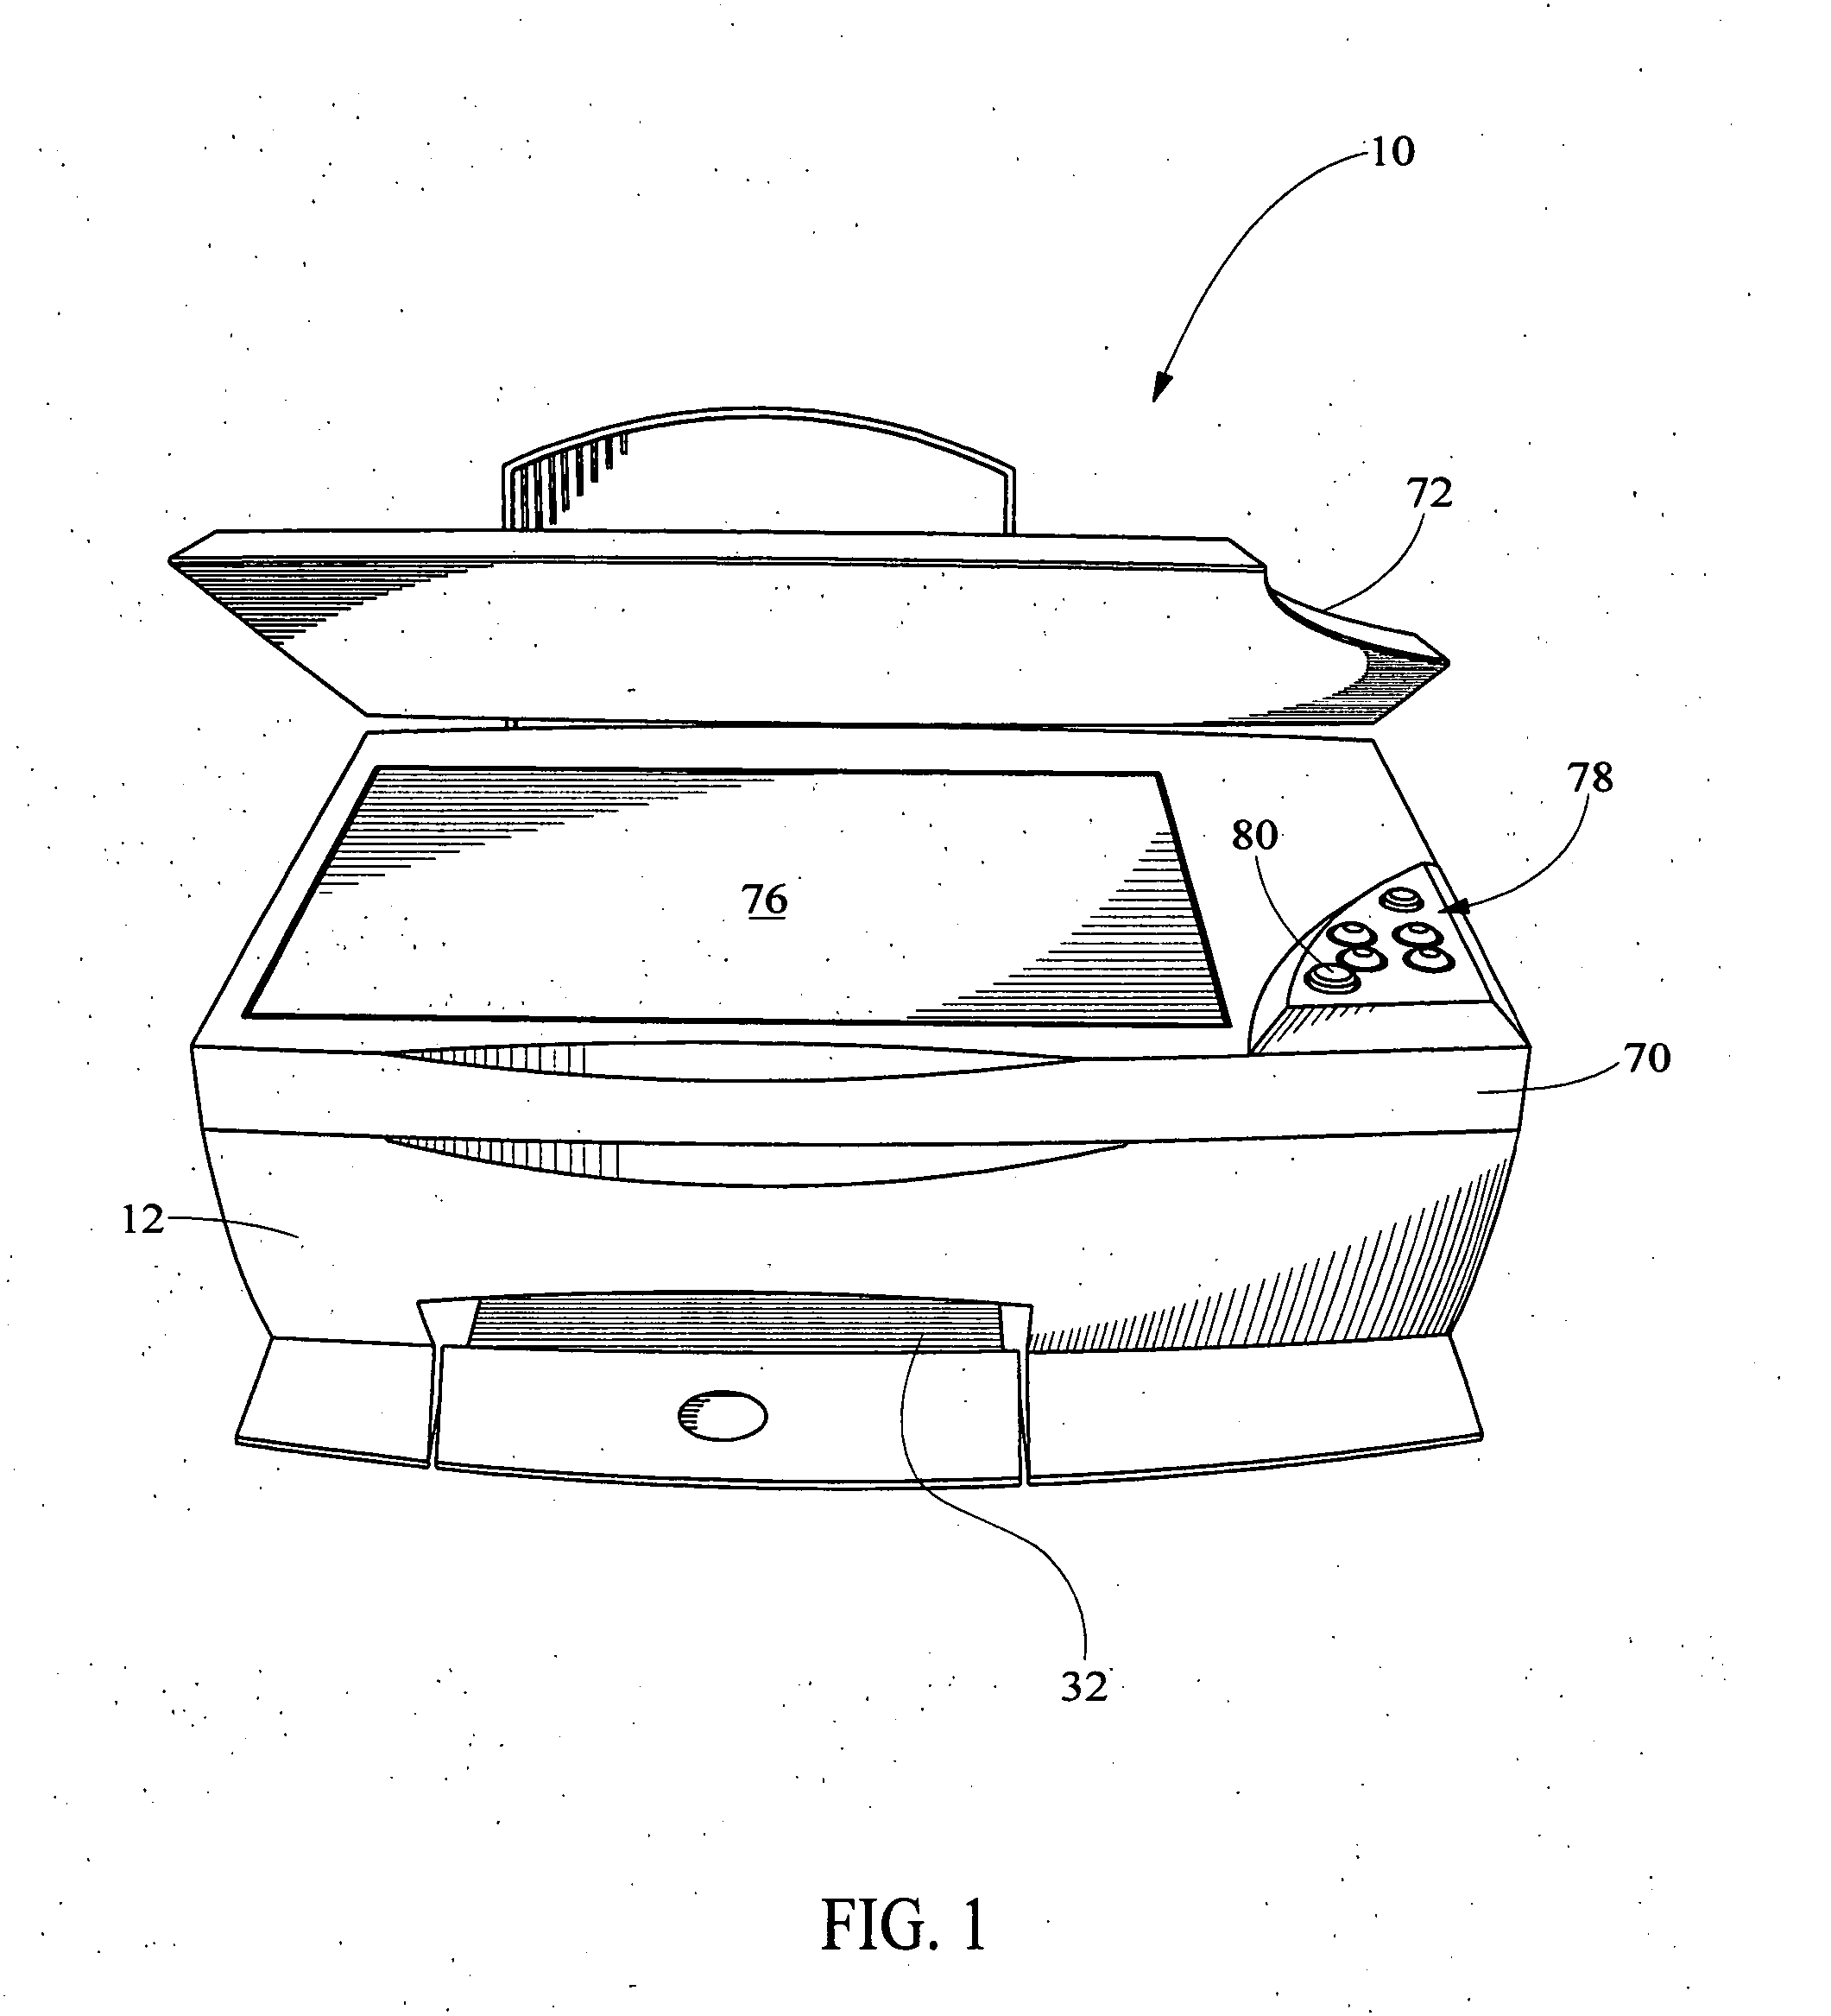 Image recording apparatus with slidably opening scanner bed